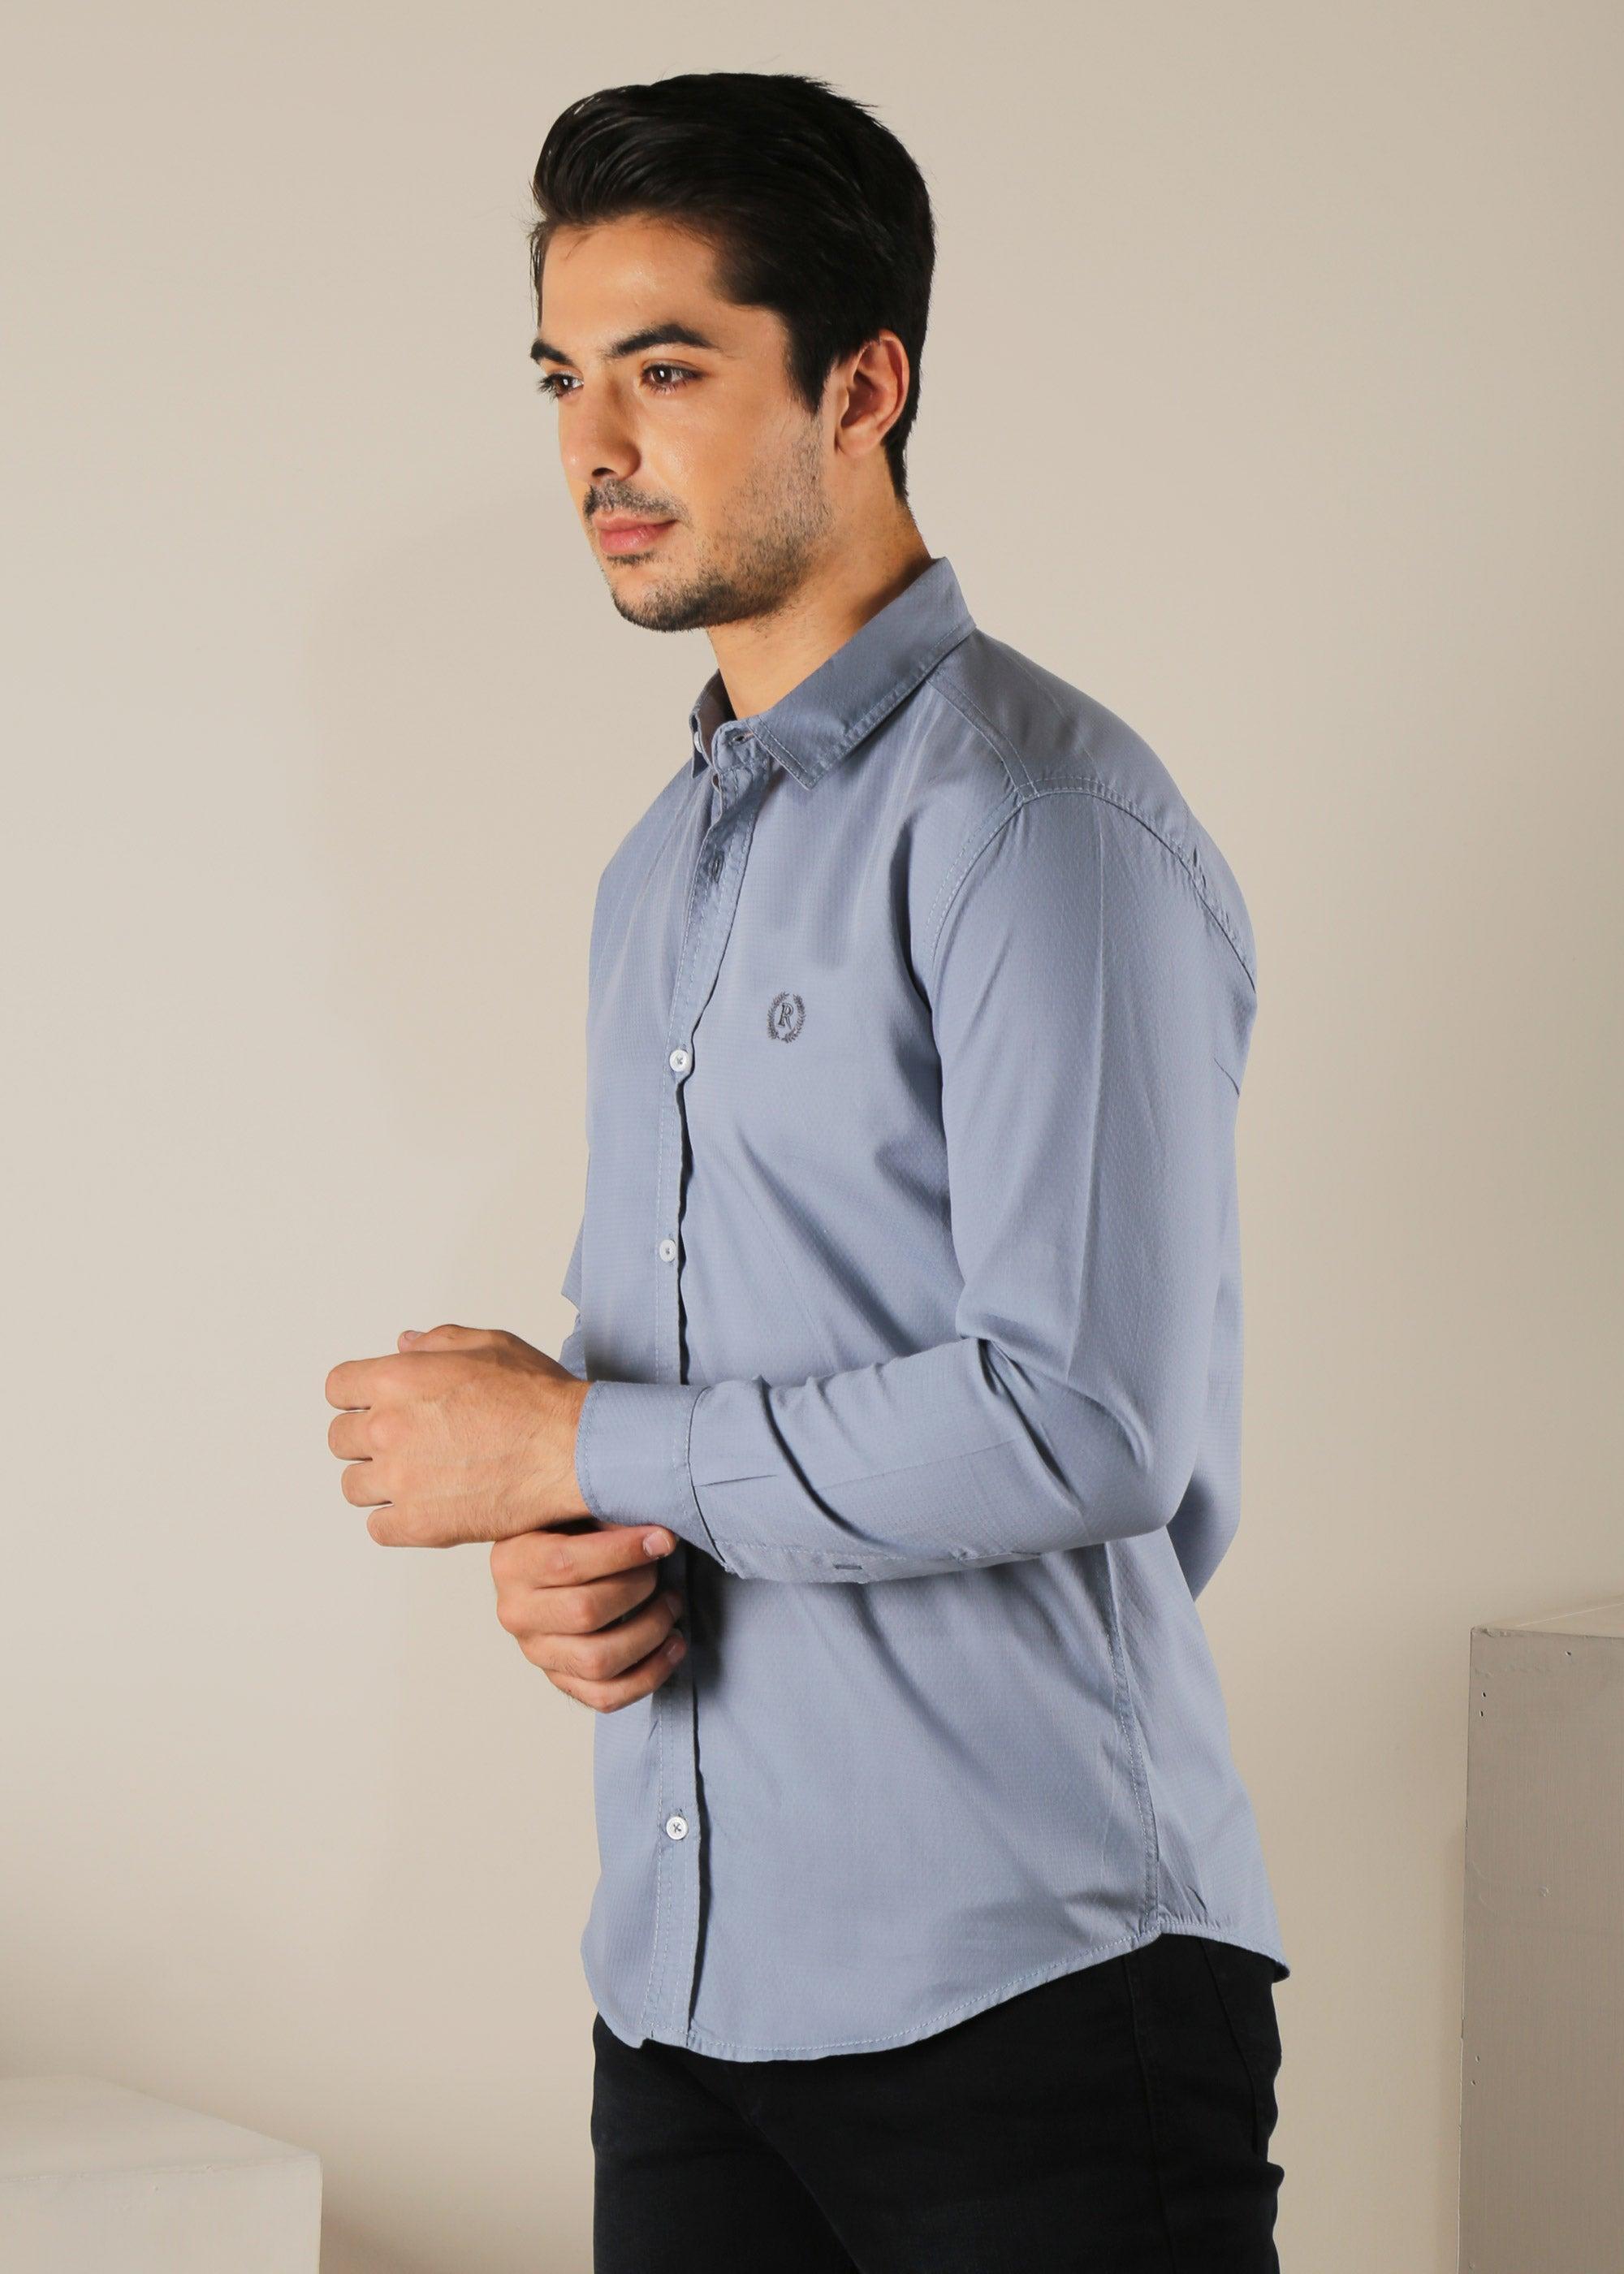 SELF TEXTURED FULL SLEEVES SLIM FIT SHIRT, TOPWEAR, ROYAL TAG, MODJEN  FOR THE MODERN GENERATION